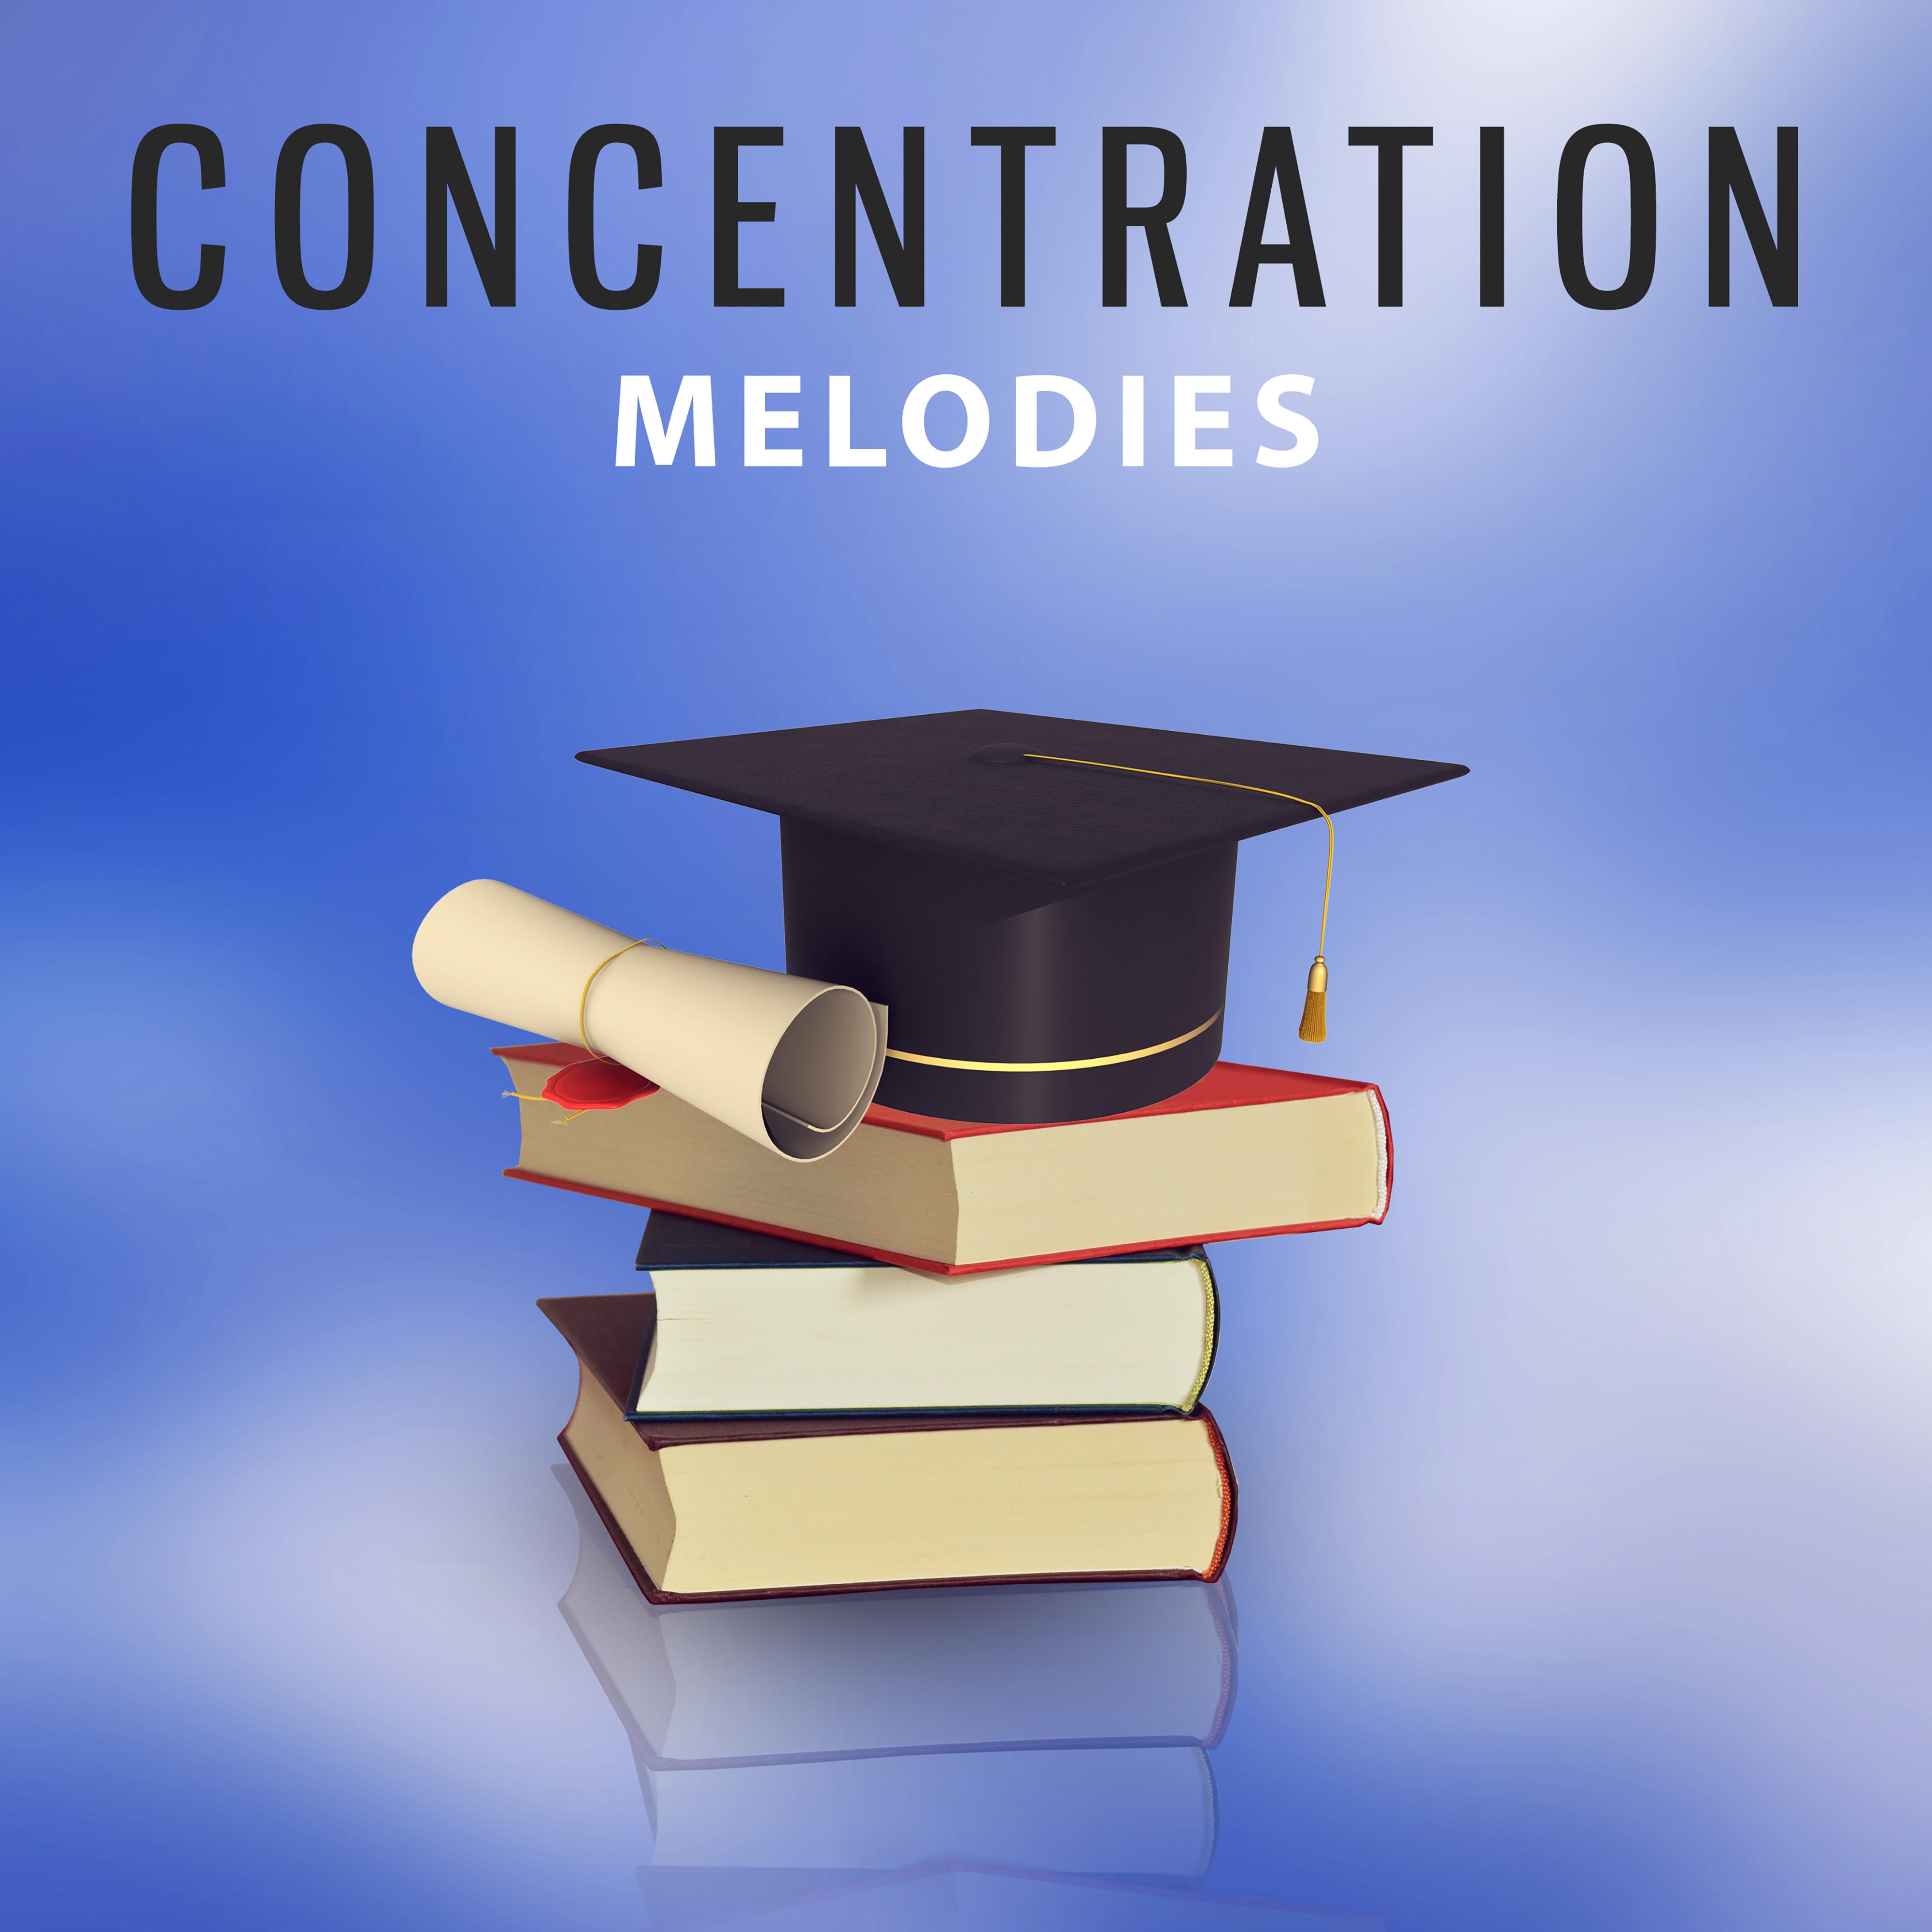 Concentration Melodies – New Age Music, Nature Sounds for Learning, Deep Focus, Train Your Mind